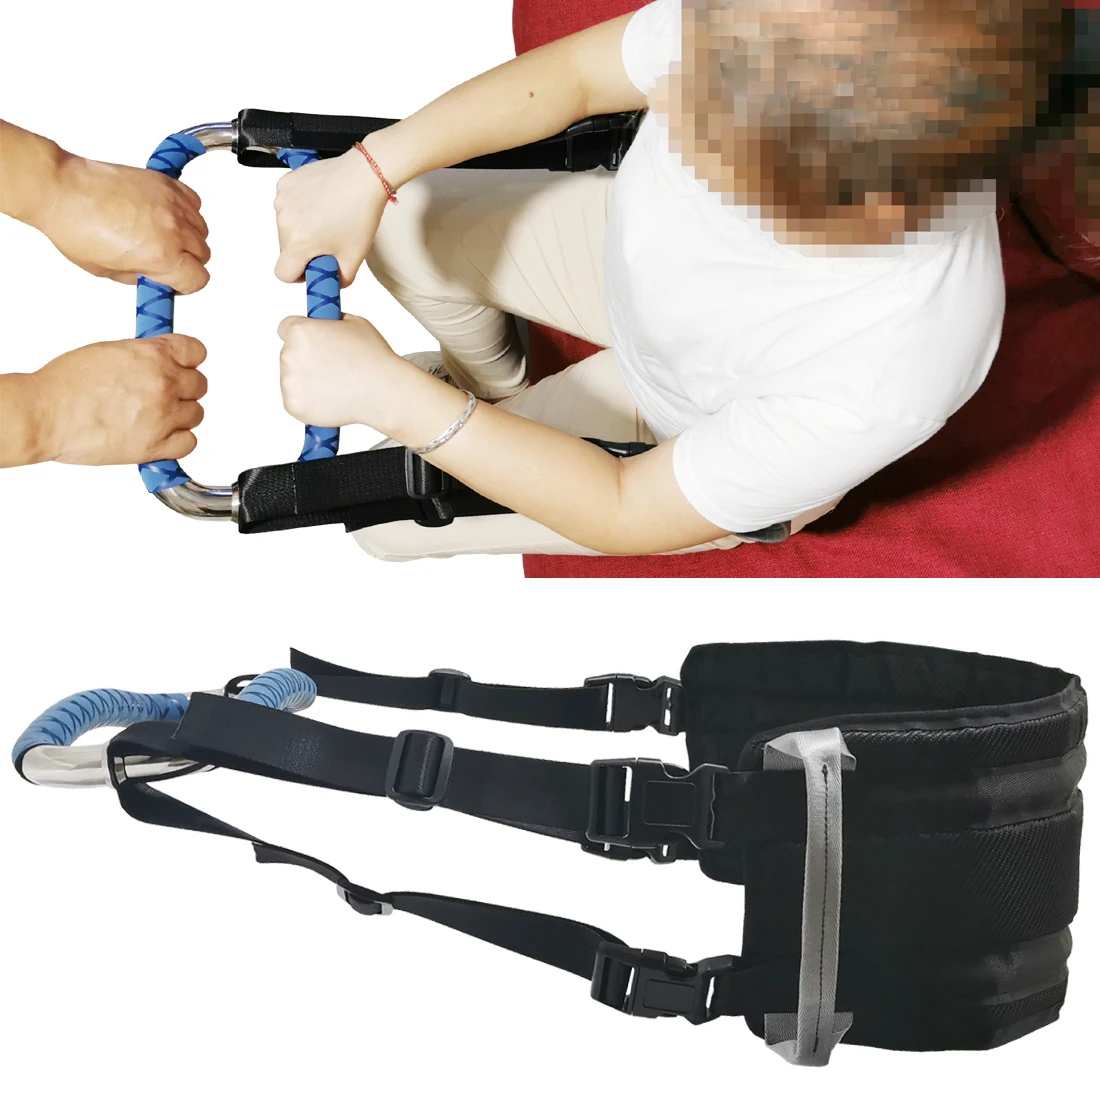 Patient Elderly Senior Help Getting Pull Up Sit to Stand Aids Transfer Gait Belt Medical Lift Sling Strap Grab Bar Blue Cover